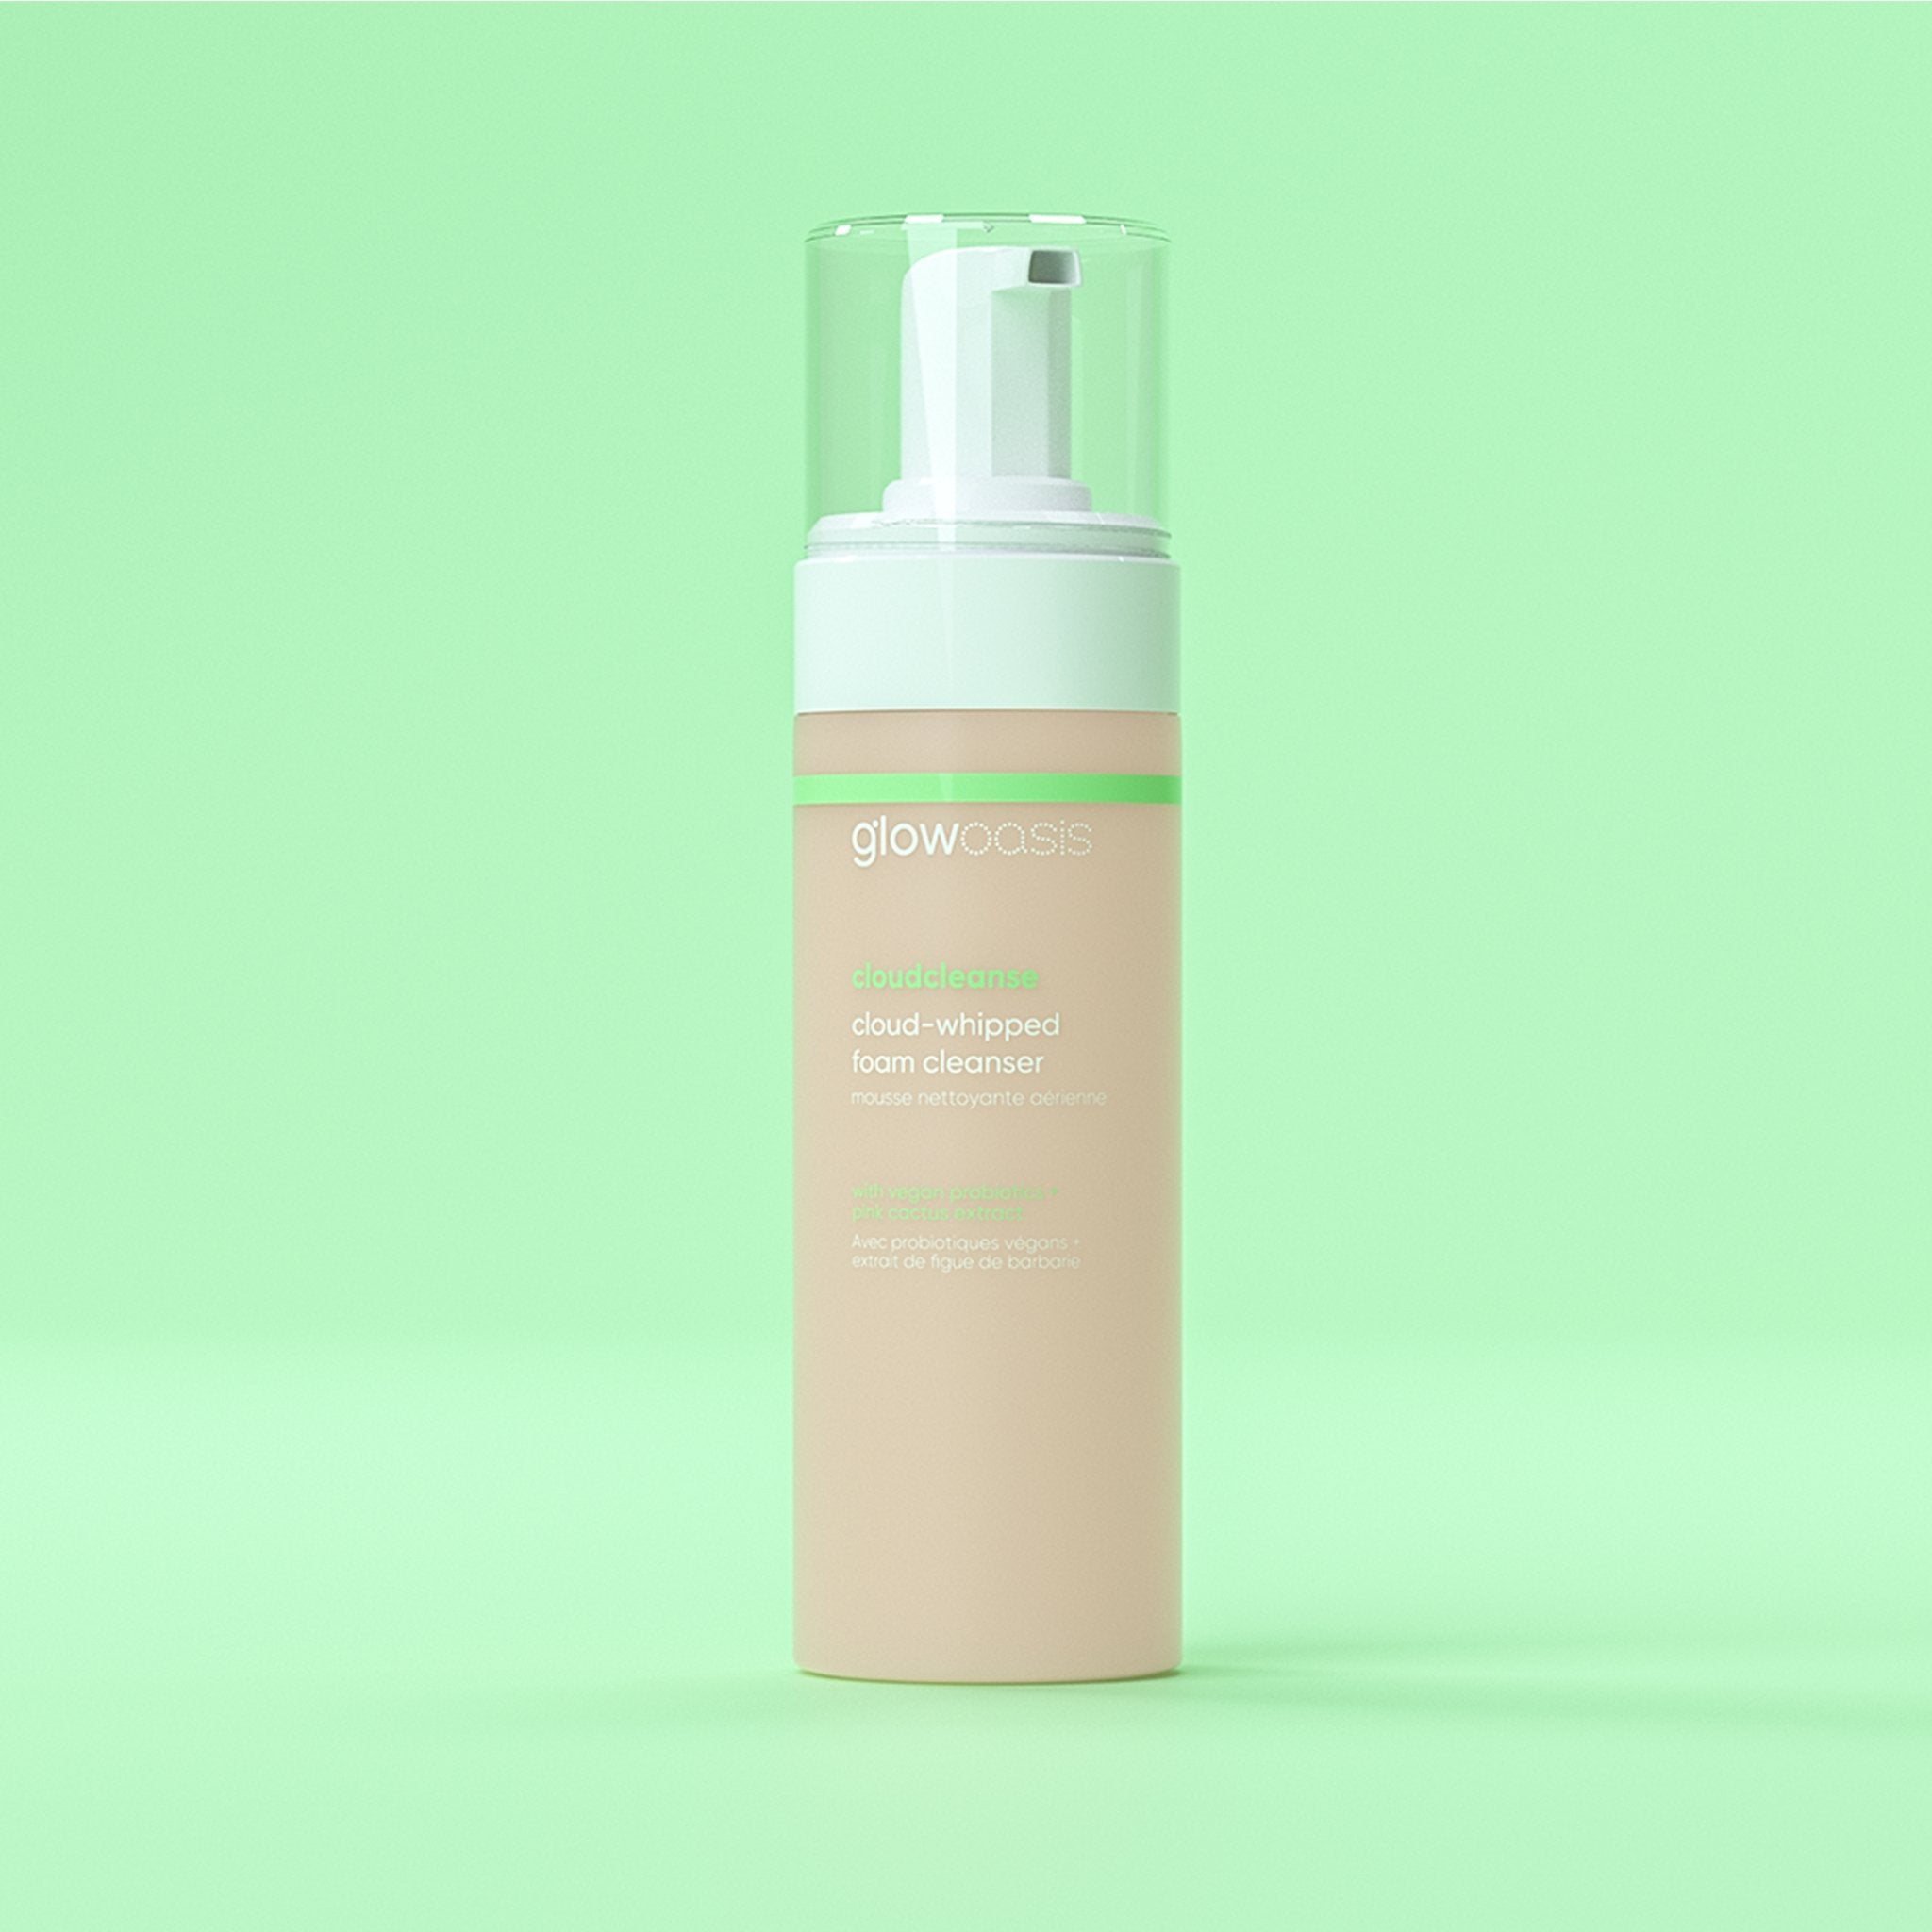 Cloudcleanse (Cloud-whipped foam cleanser)